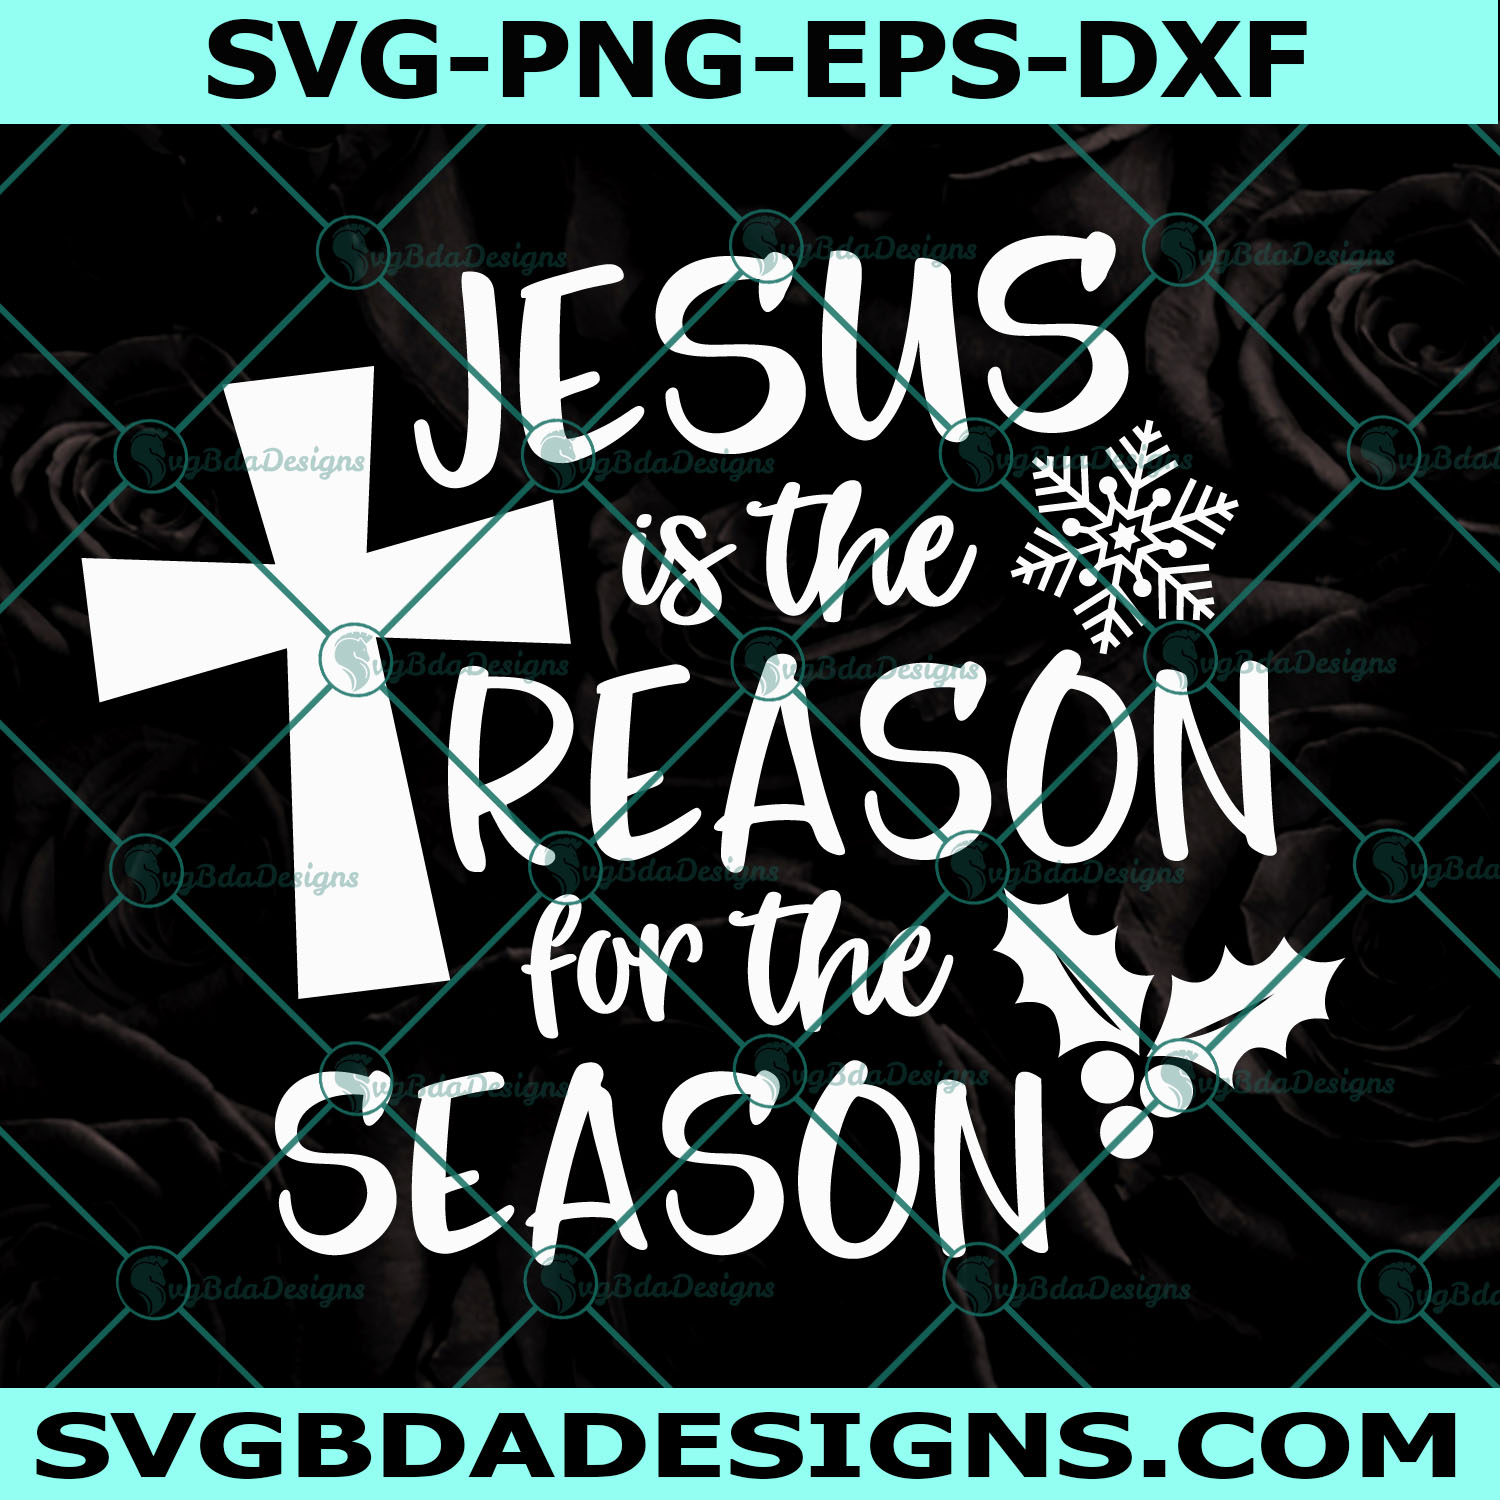 Jesus is the Reason for the Season Svg, Christmas Svg, Christian Svg, Funny Christmas Svg, Cricut, Digital Download